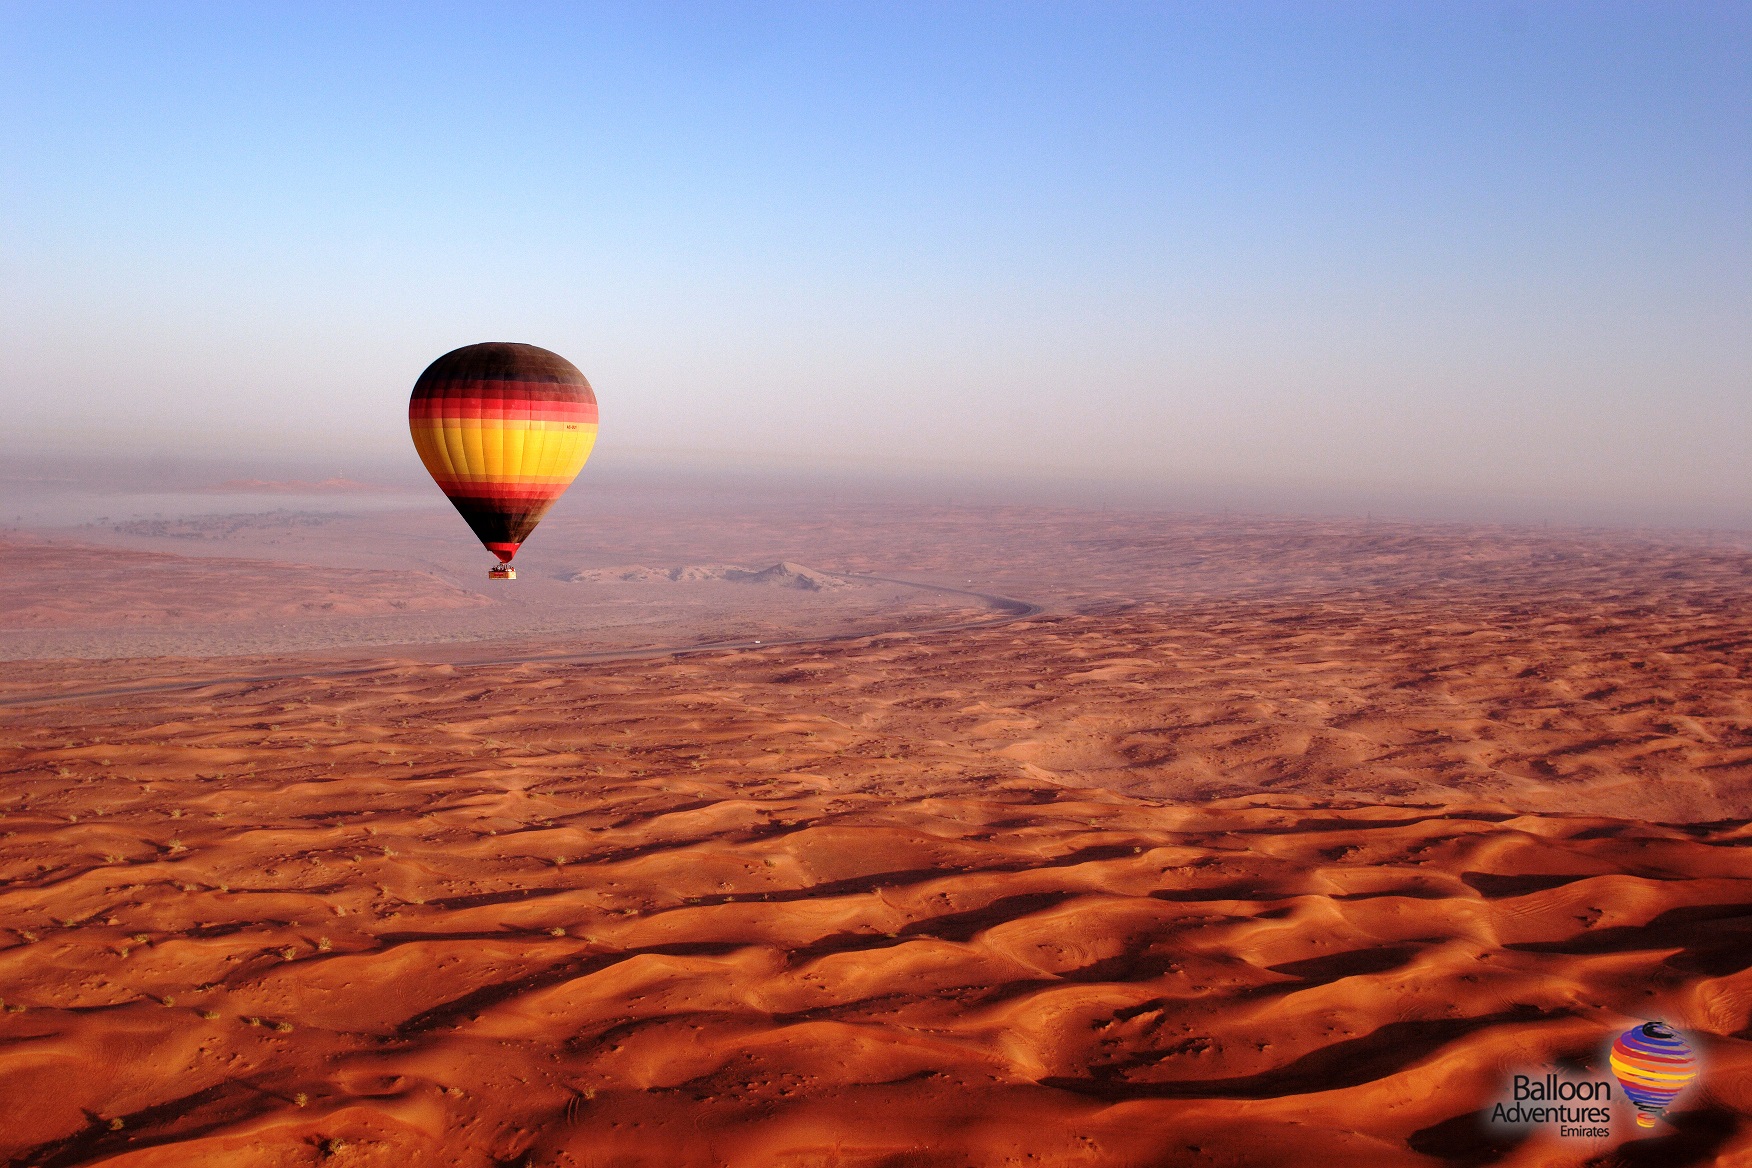 Dubai Hot Air Balloon : Romantic Desert, Silent Sunrises, and Exclusive Views of the Country's Premier National Ecological Reserve